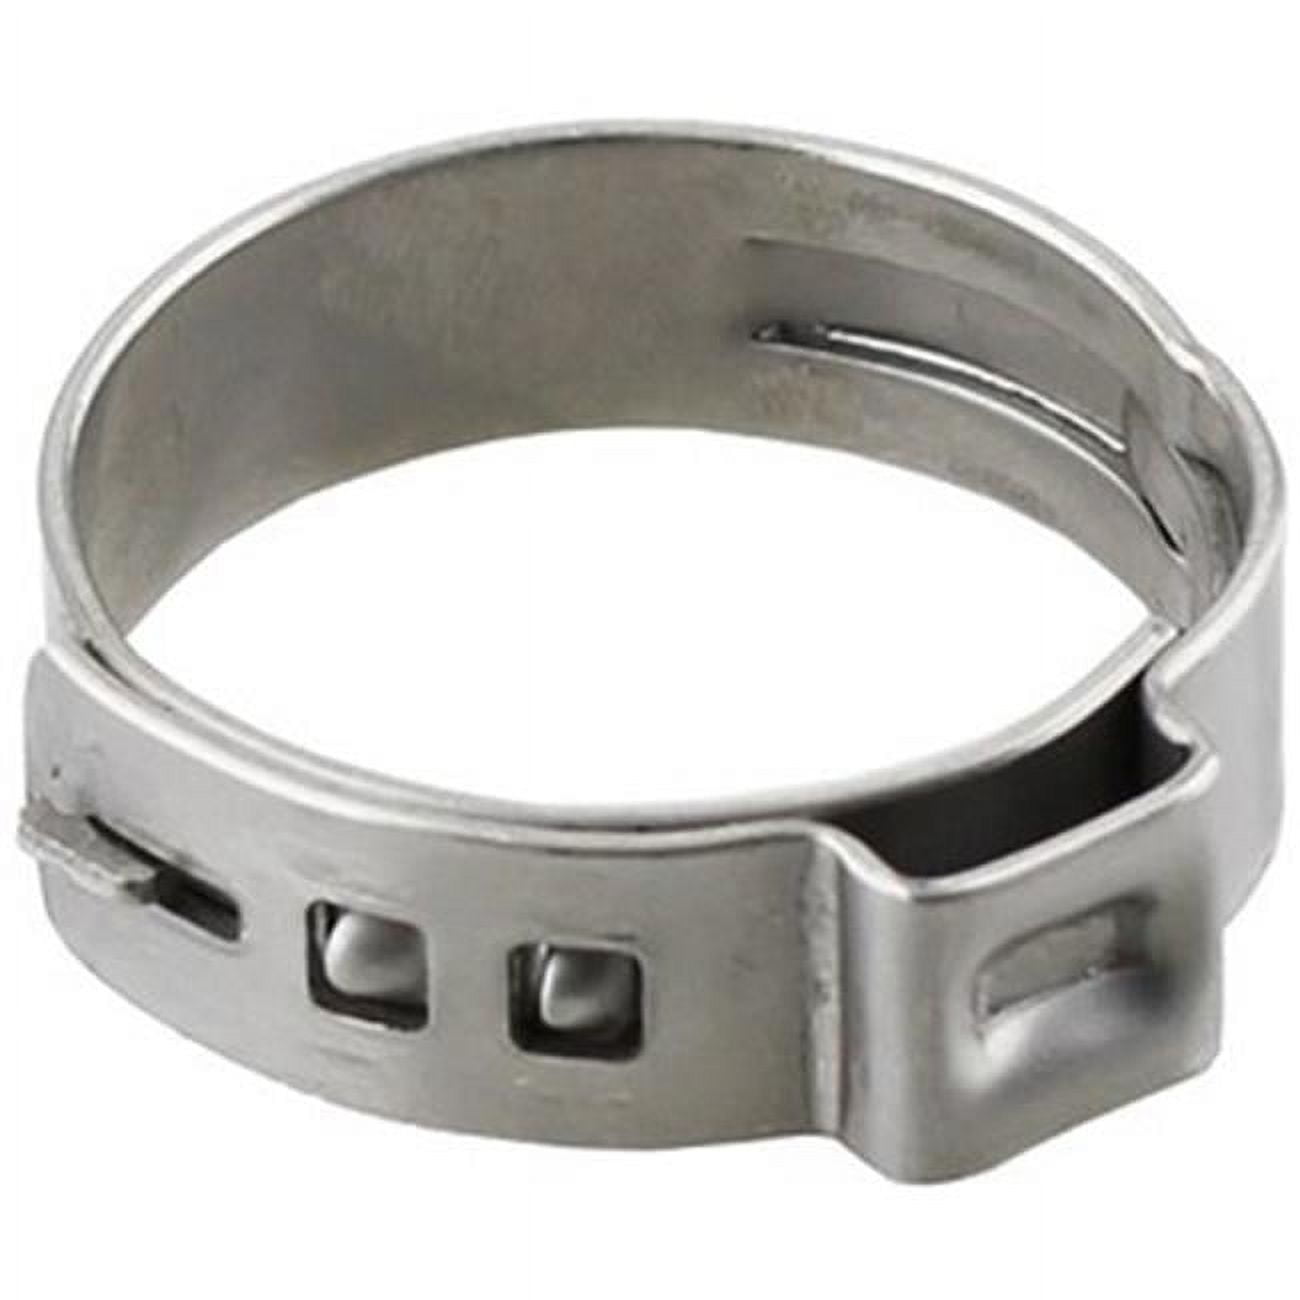 Picture of Boshart & Plumbeeze PE-PS-PC05-100 0.5 in. Stainless Steel PEX Pinch Clamp - Pack of 100